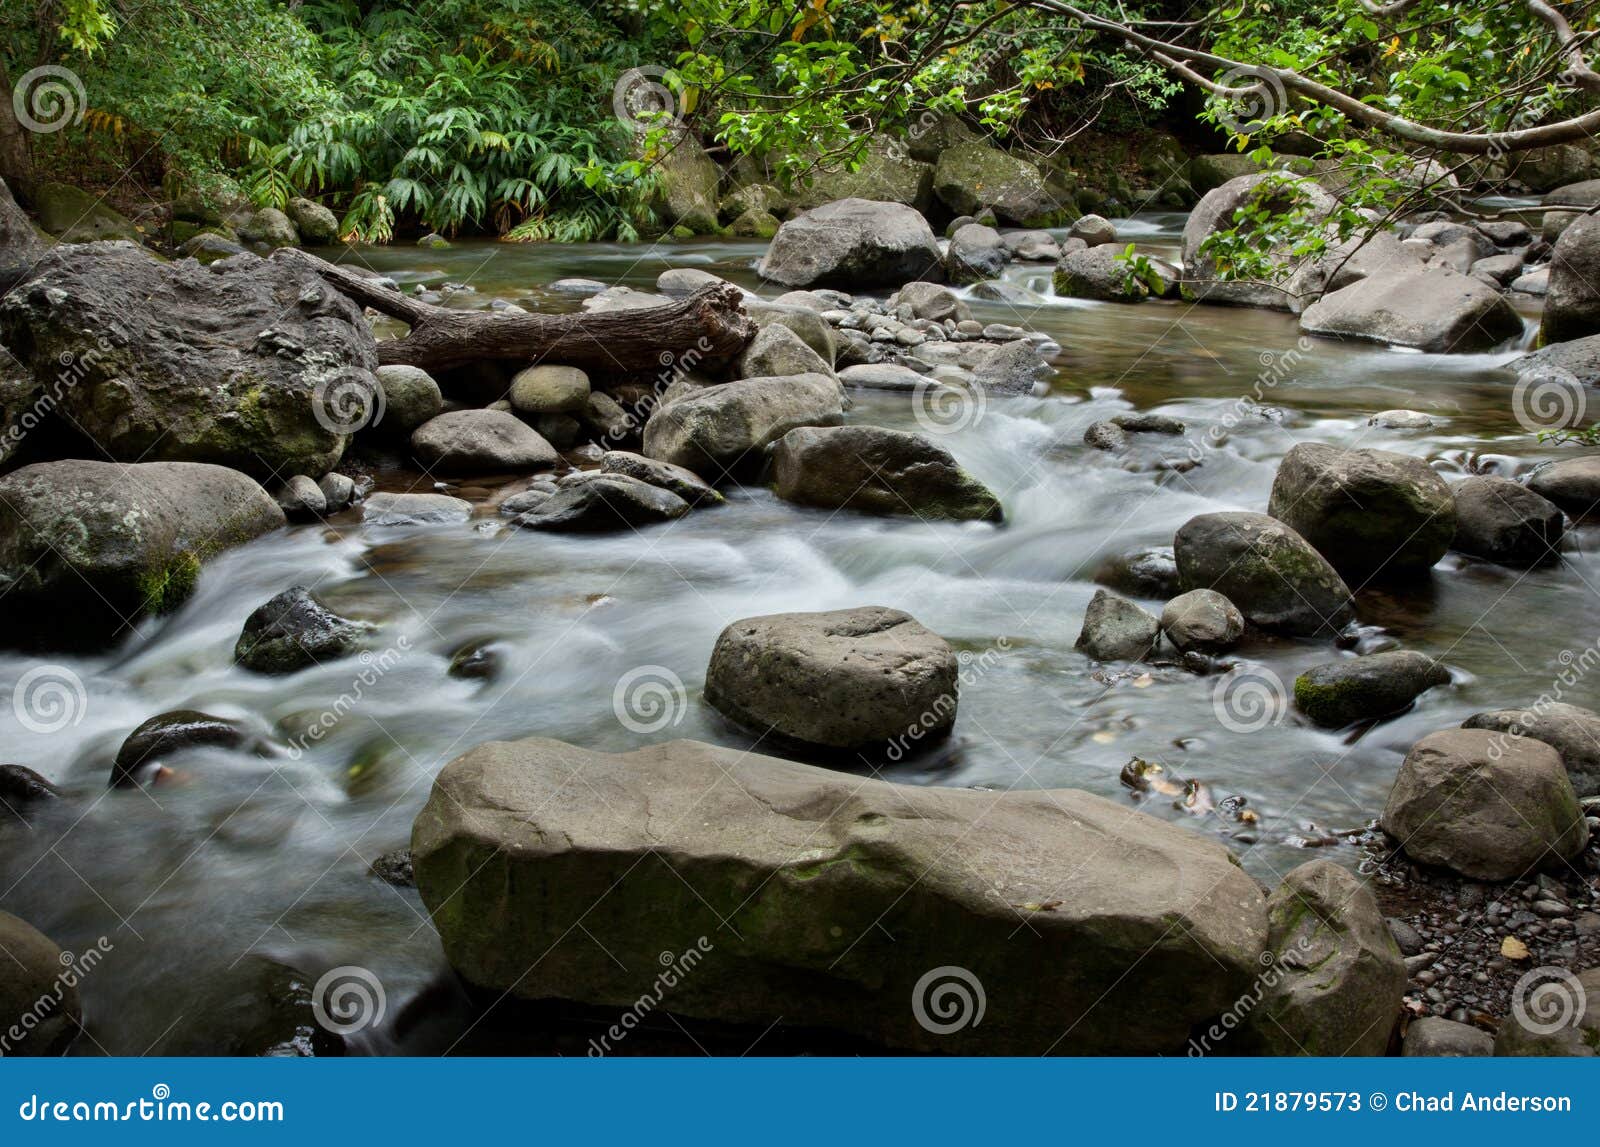 River Water in Forest, Rocky River Side Stock Photo - Image of grass,  scenery: 165302448